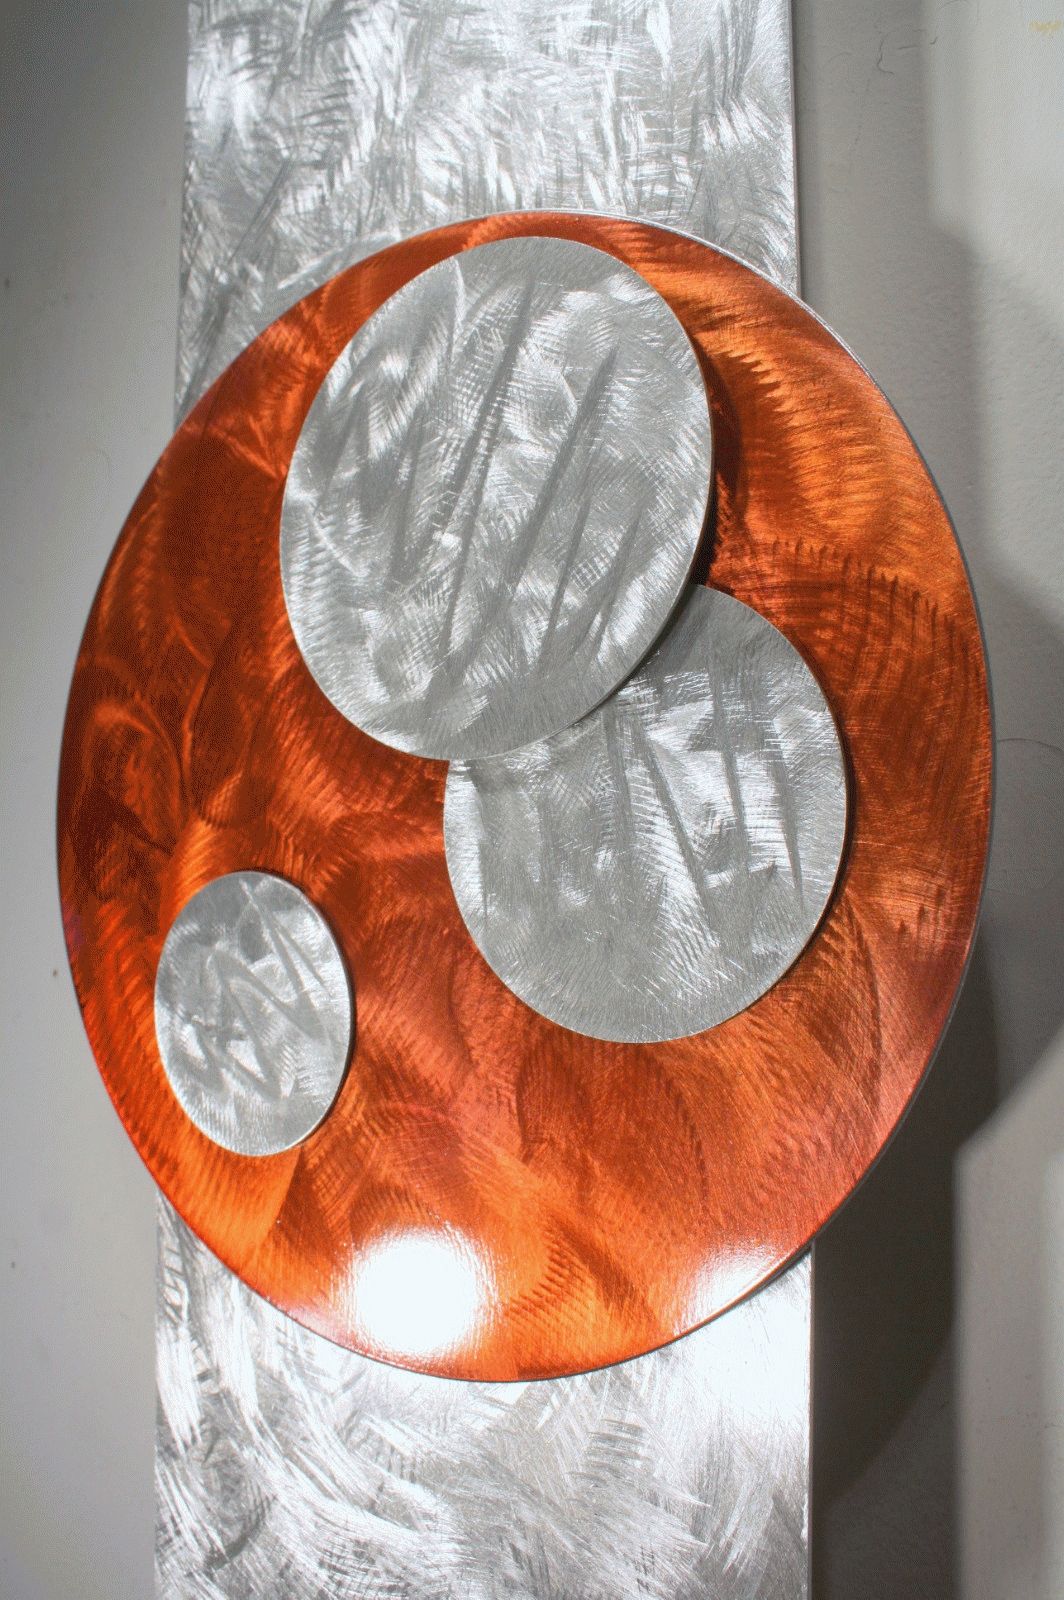 Orange Art, Metal Wall Sculpture, Abstract Home Decor Painting Throughout Latest Orange Metal Wall Art (View 5 of 20)